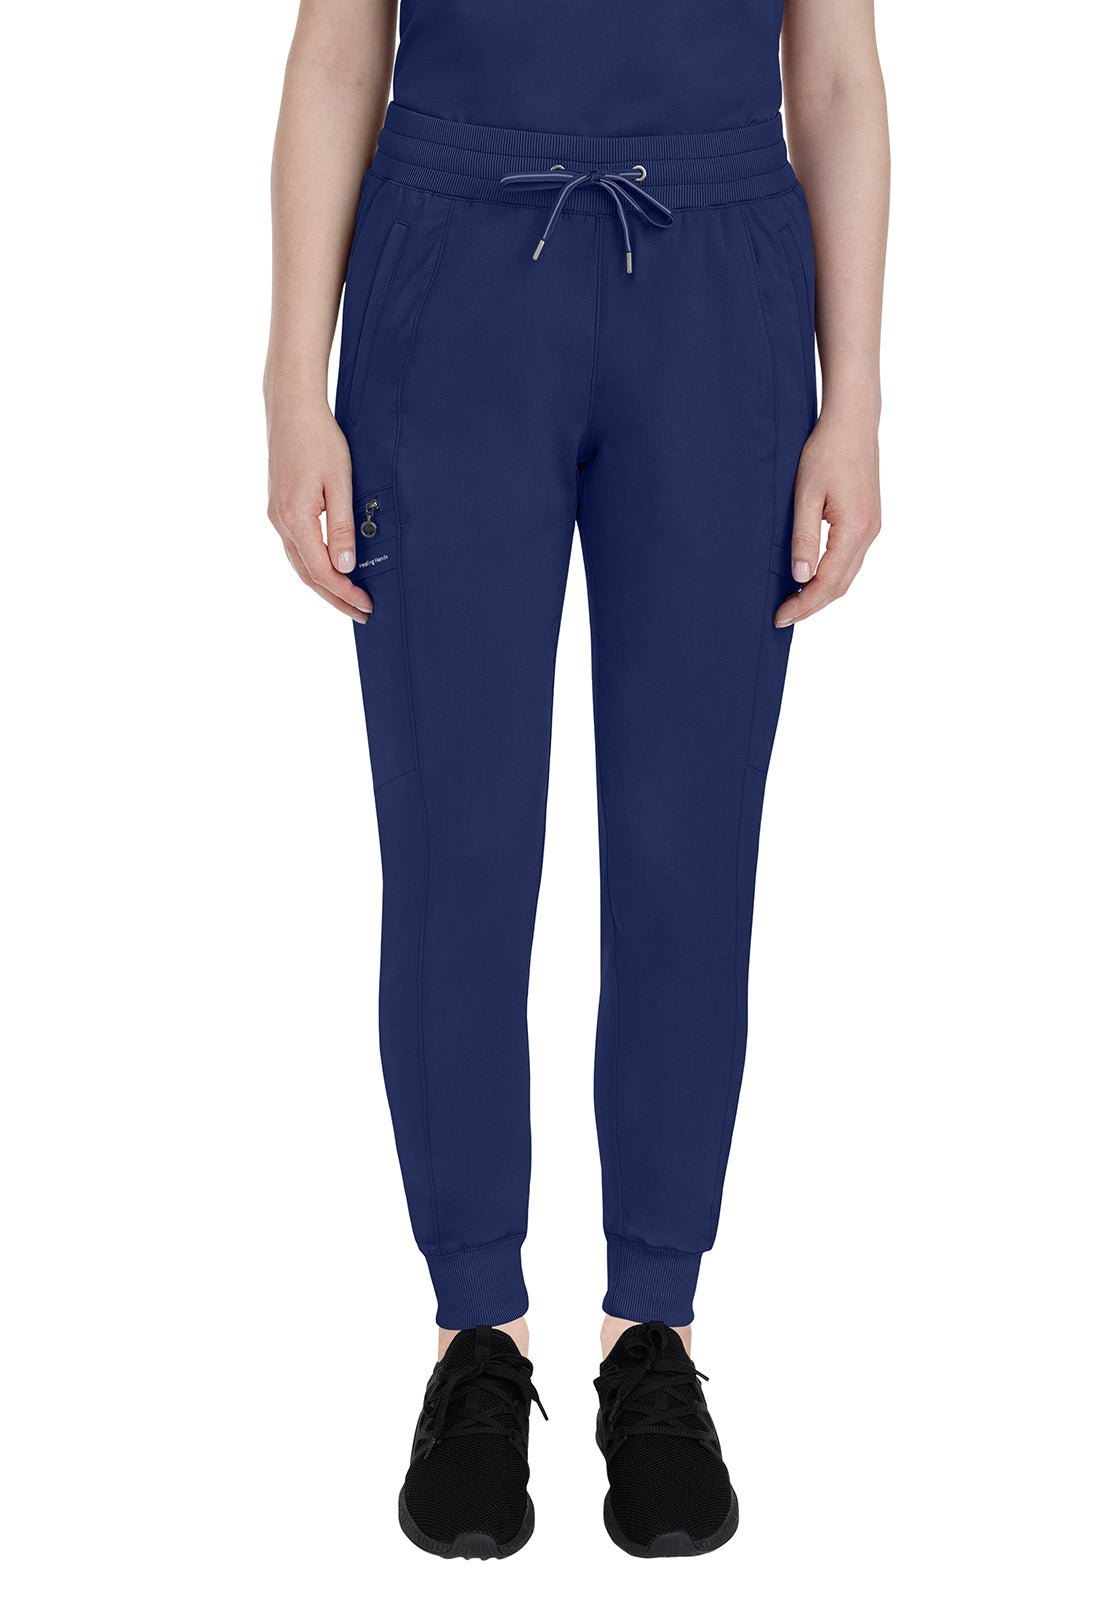 Healing Hands Toby Jogger Pant 9244 in Black, Navy, Pewter, Royal - Scrubs Select